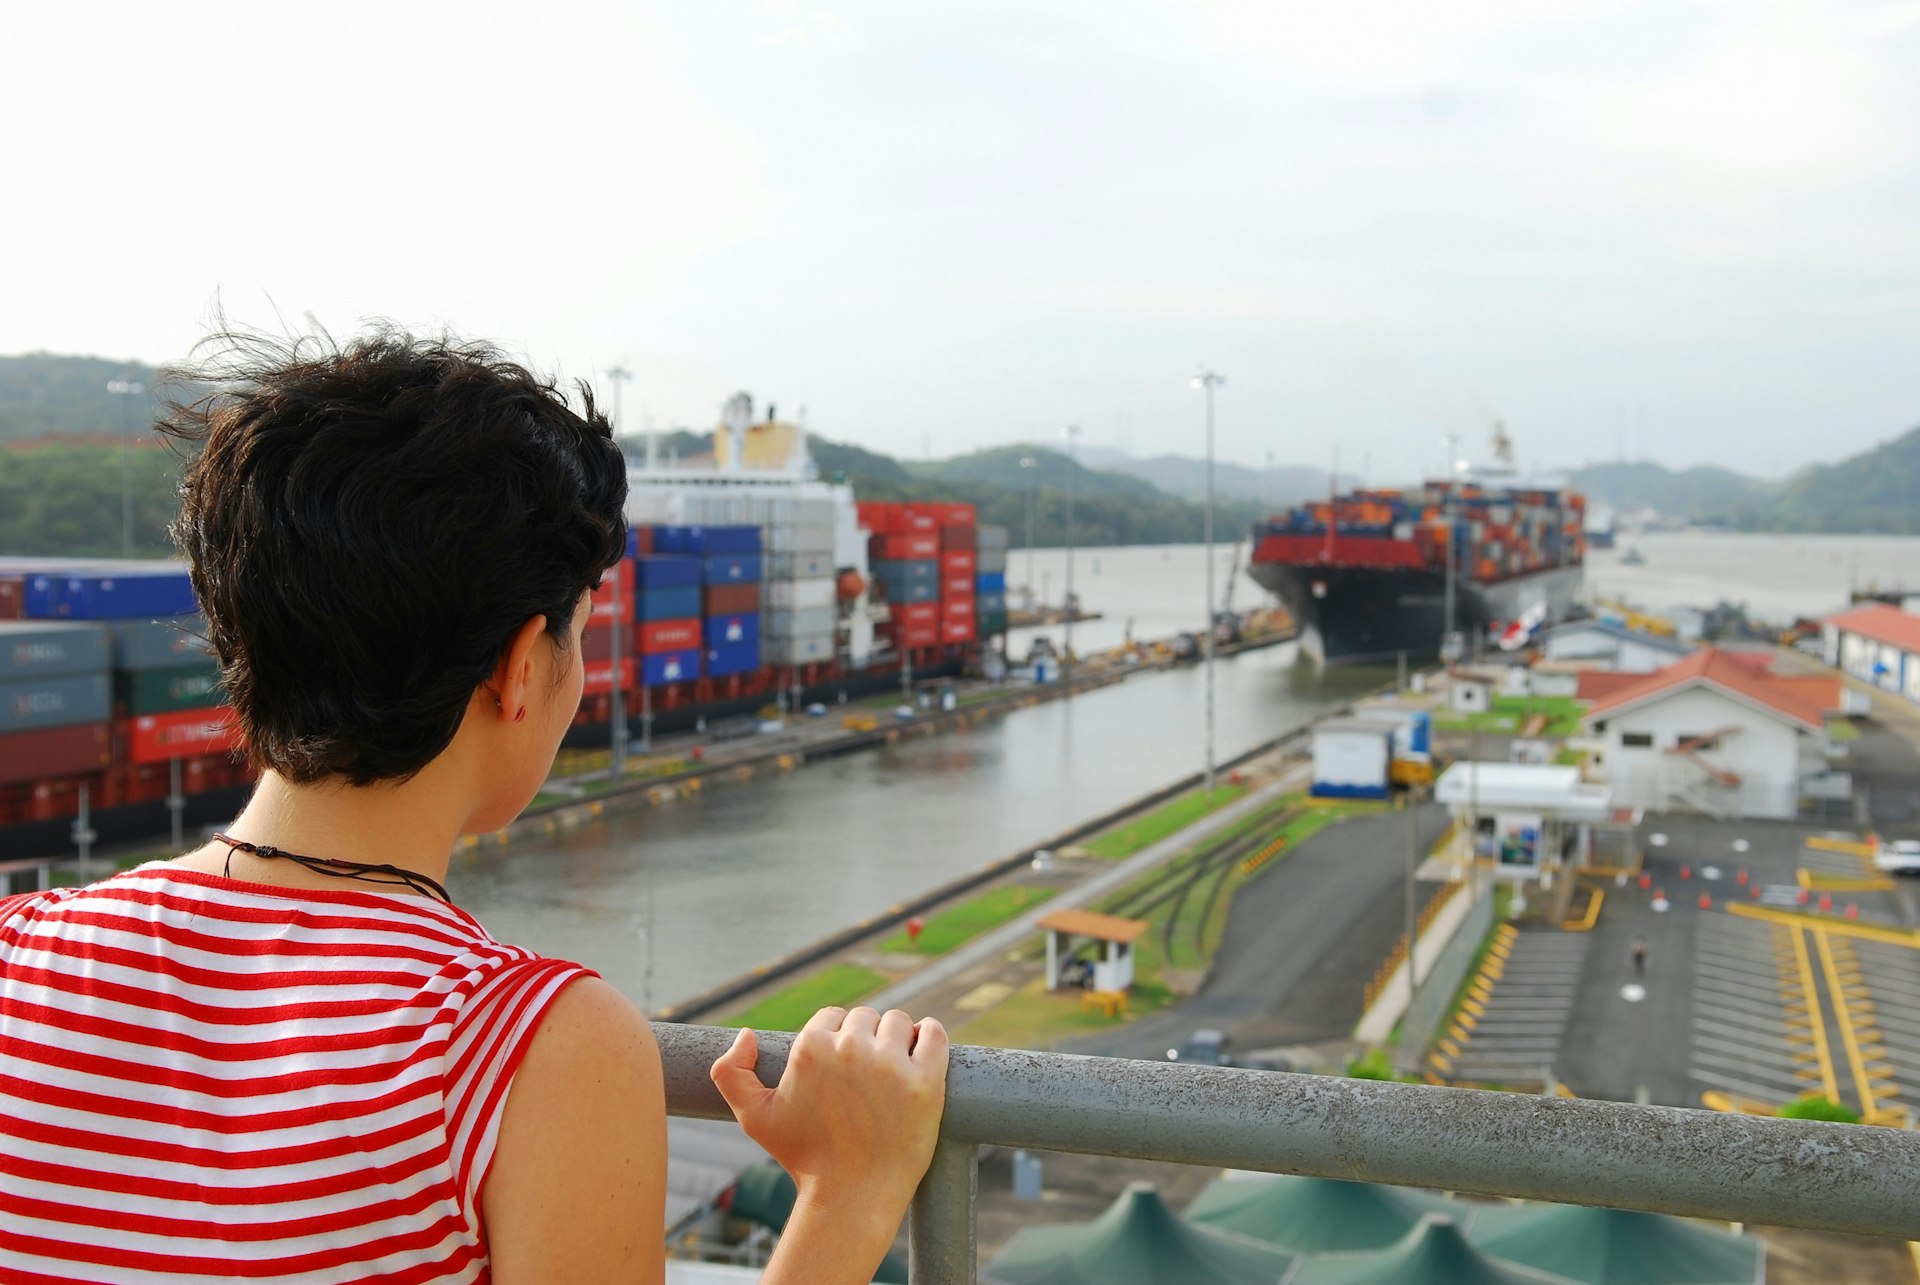 A young woman standing at the Miraflores Locks visitor viewing platform on the Panama Canal in Panama. She is watching two container ships entering the locks.